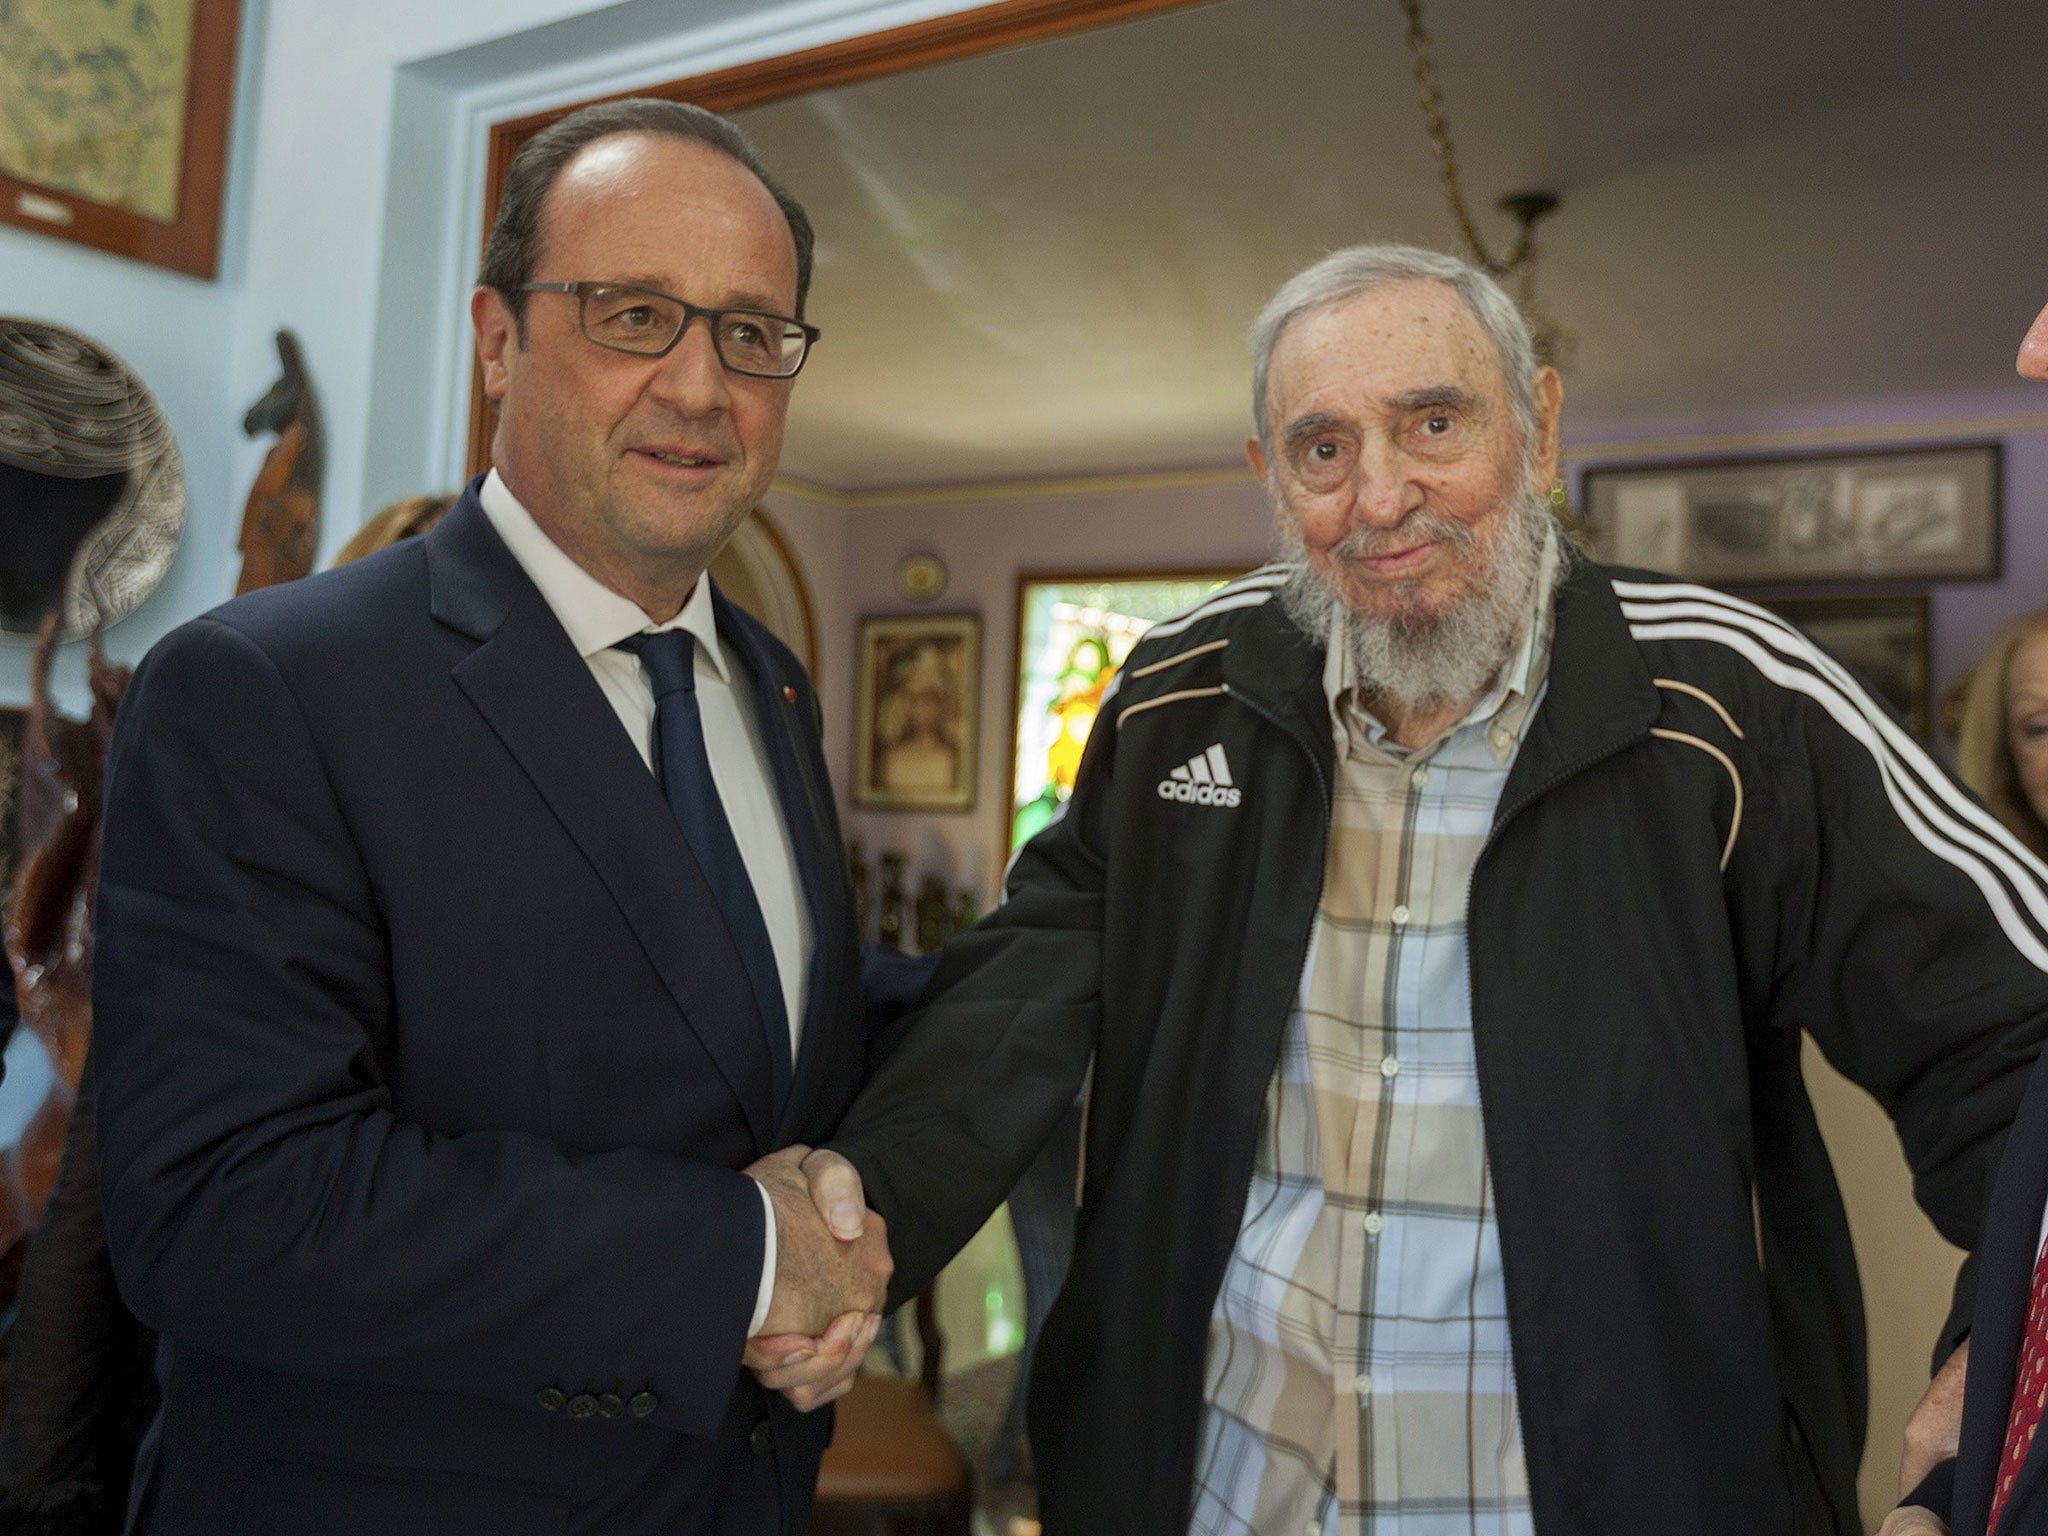 Francois Hollande meets 88-year-old Fidel Castro during the first French Presidential visit to Cuba for more than 100 years on 11 May, 2015